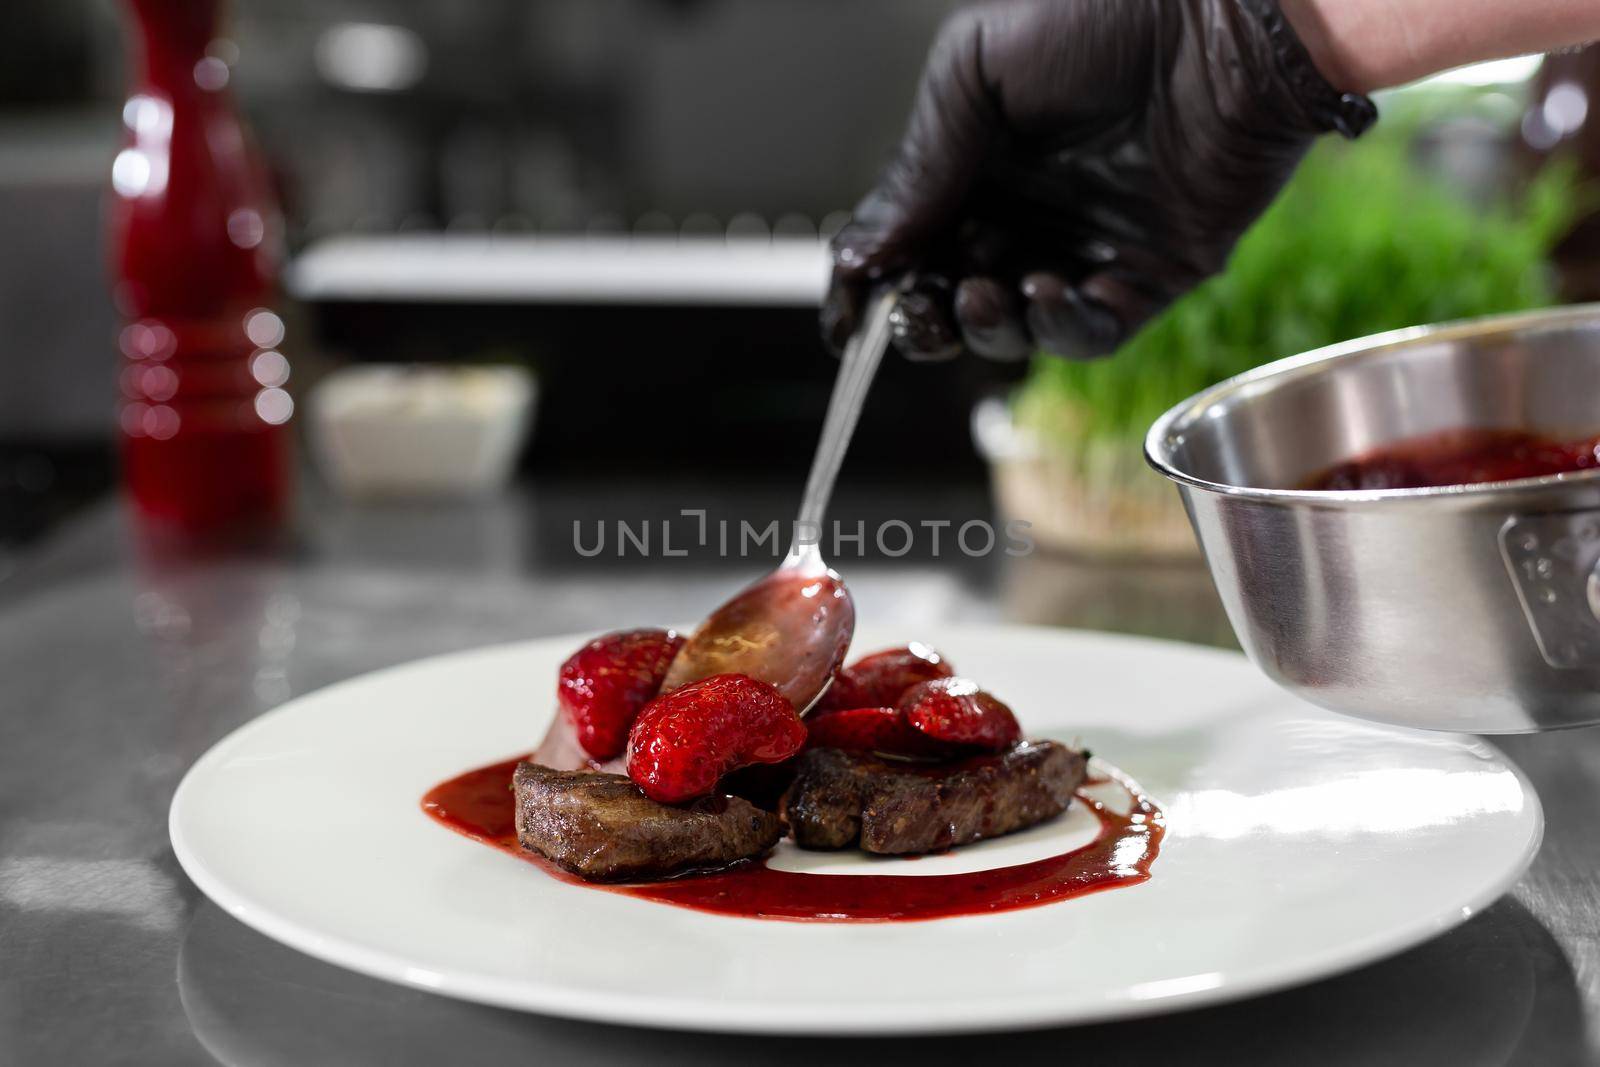 Chef decorates meat with strawberries in a professional kitchen.